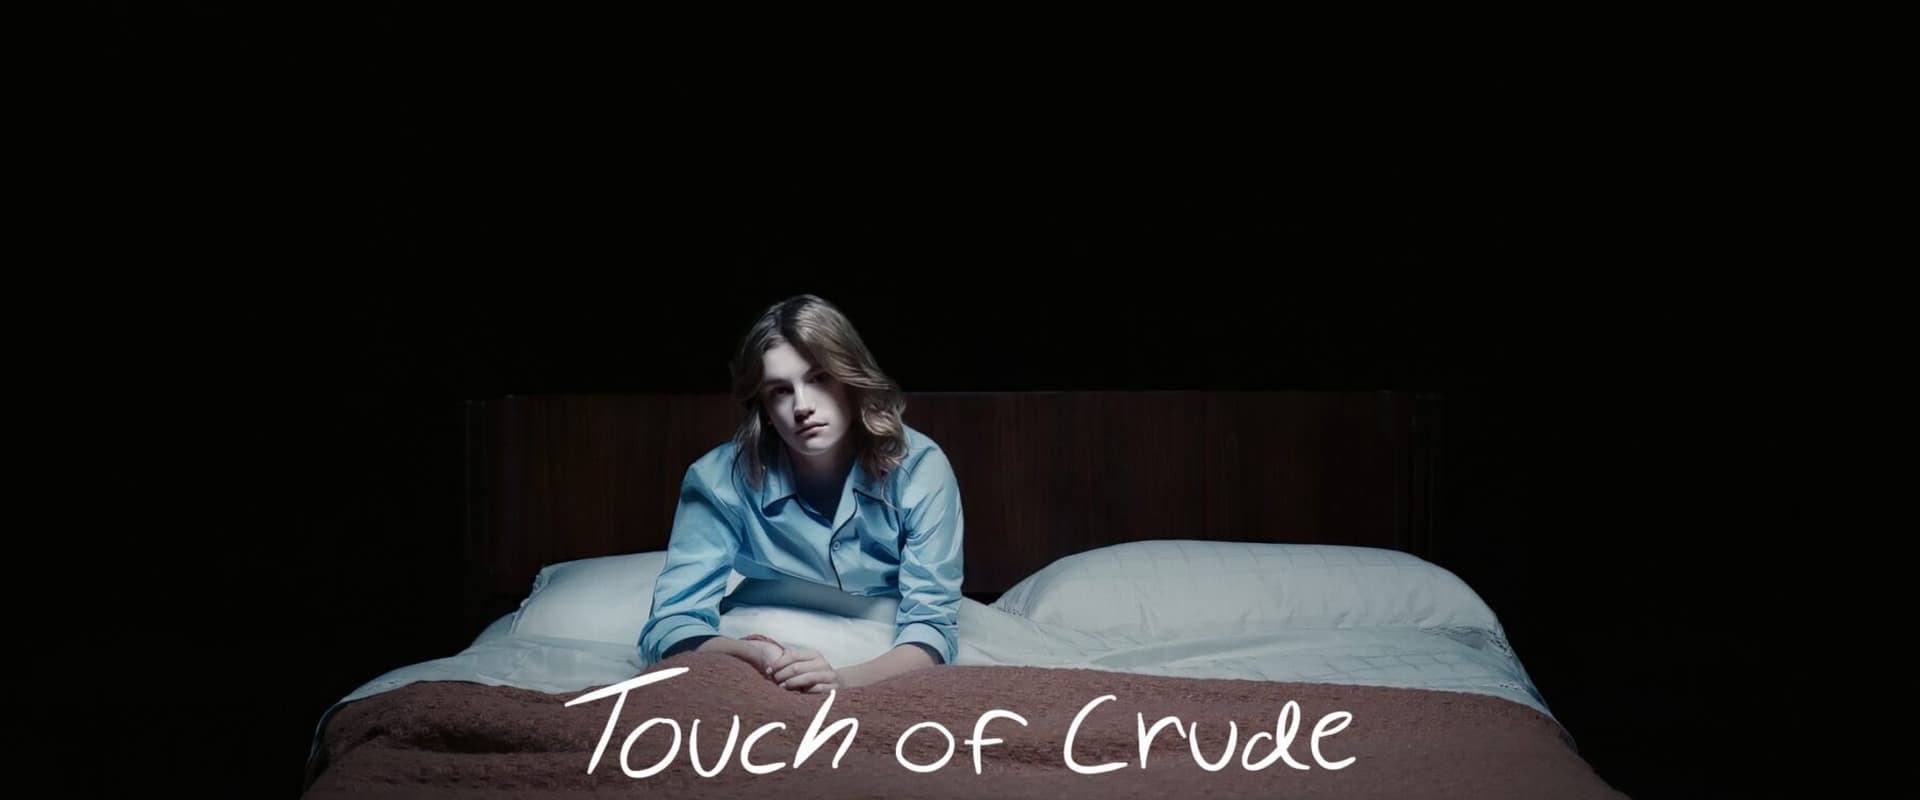 Touch of Crude